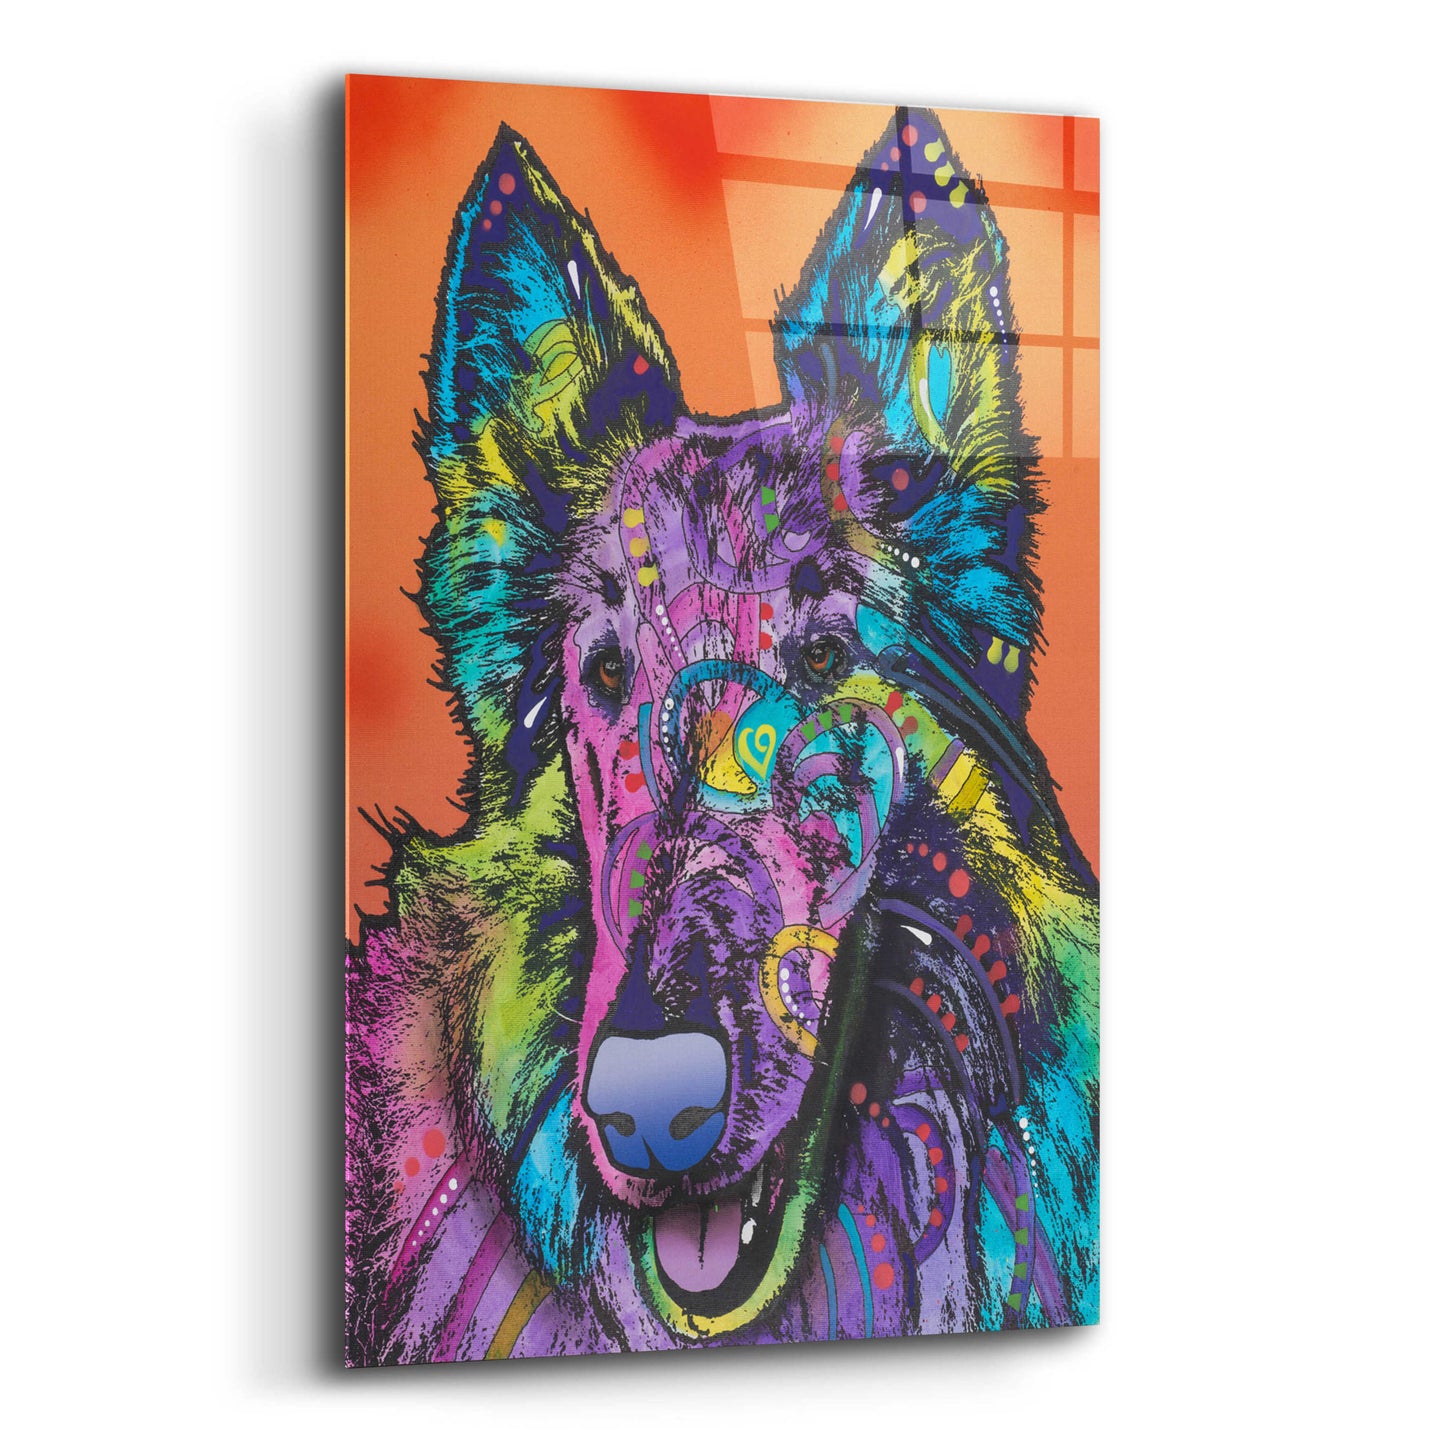 Epic Art 'Ava' by Dean Russo, Acrylic Glass Wall Art,12x16